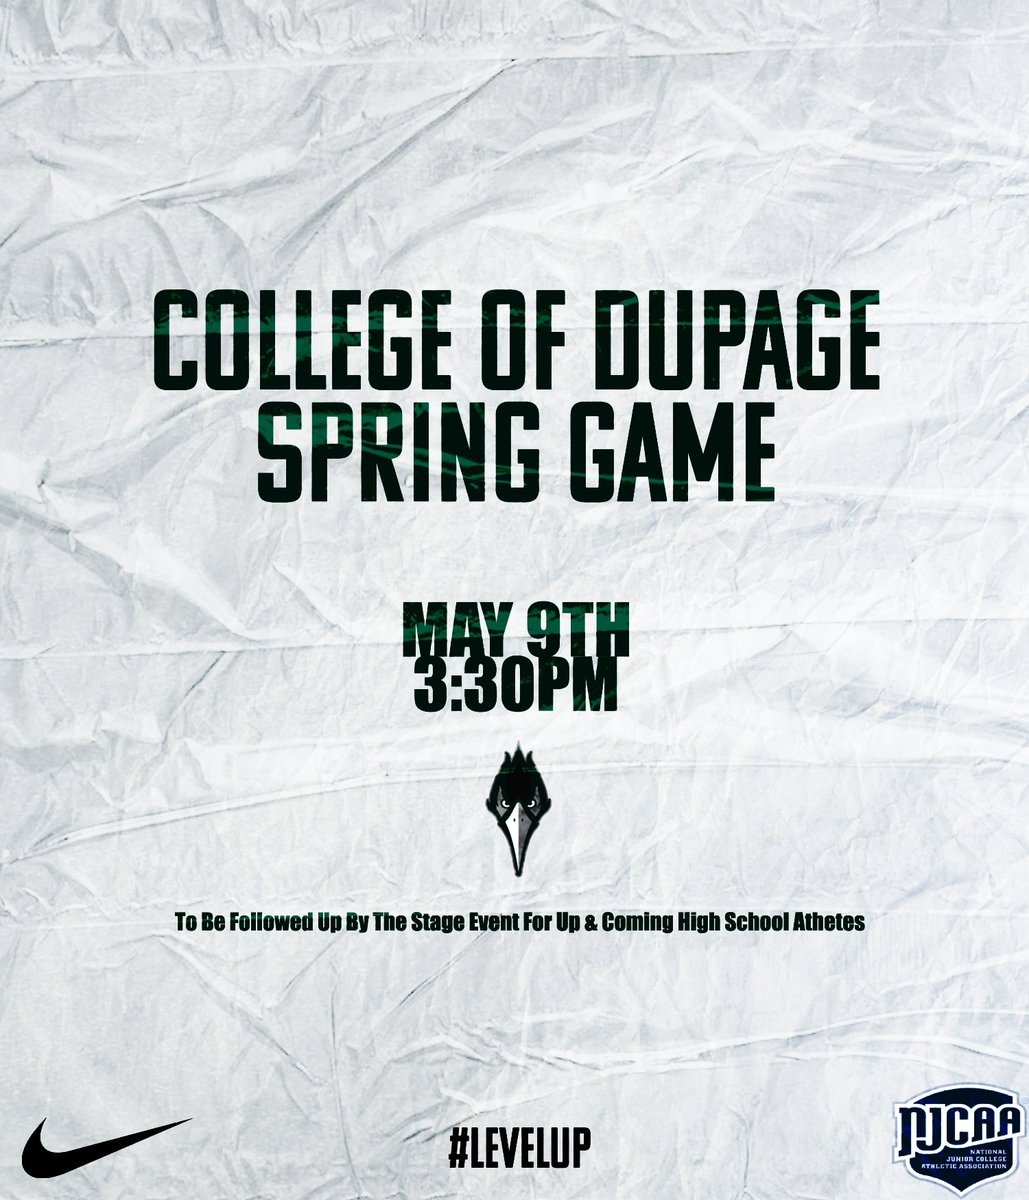 𝐒𝐩𝐫𝐢𝐧𝐠 𝐆𝐚𝐦𝐞 𝐎𝐧 𝐃𝐞𝐜𝐤 ‼️ 📅 Tuesday, May 9th ⏰ 3:30pm CT Open to the public, Illinois HS Coaches & all College Coaches. Come check out what we have here at the College of DuPage, you won't be disappointed! This will be a great atmosphere! #GoChaps | #LevelUp